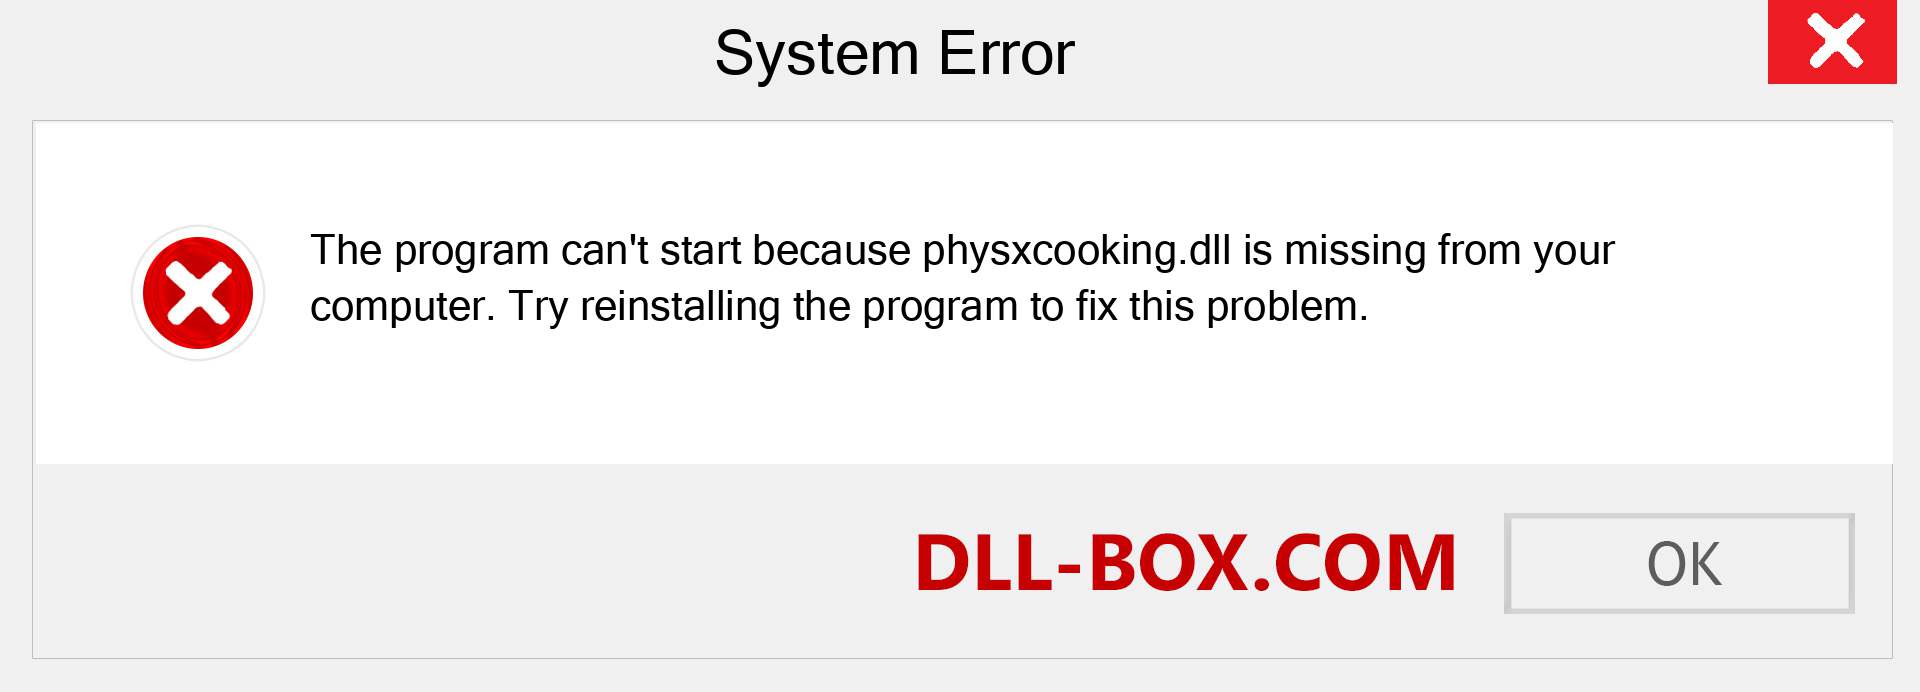  physxcooking.dll file is missing?. Download for Windows 7, 8, 10 - Fix  physxcooking dll Missing Error on Windows, photos, images